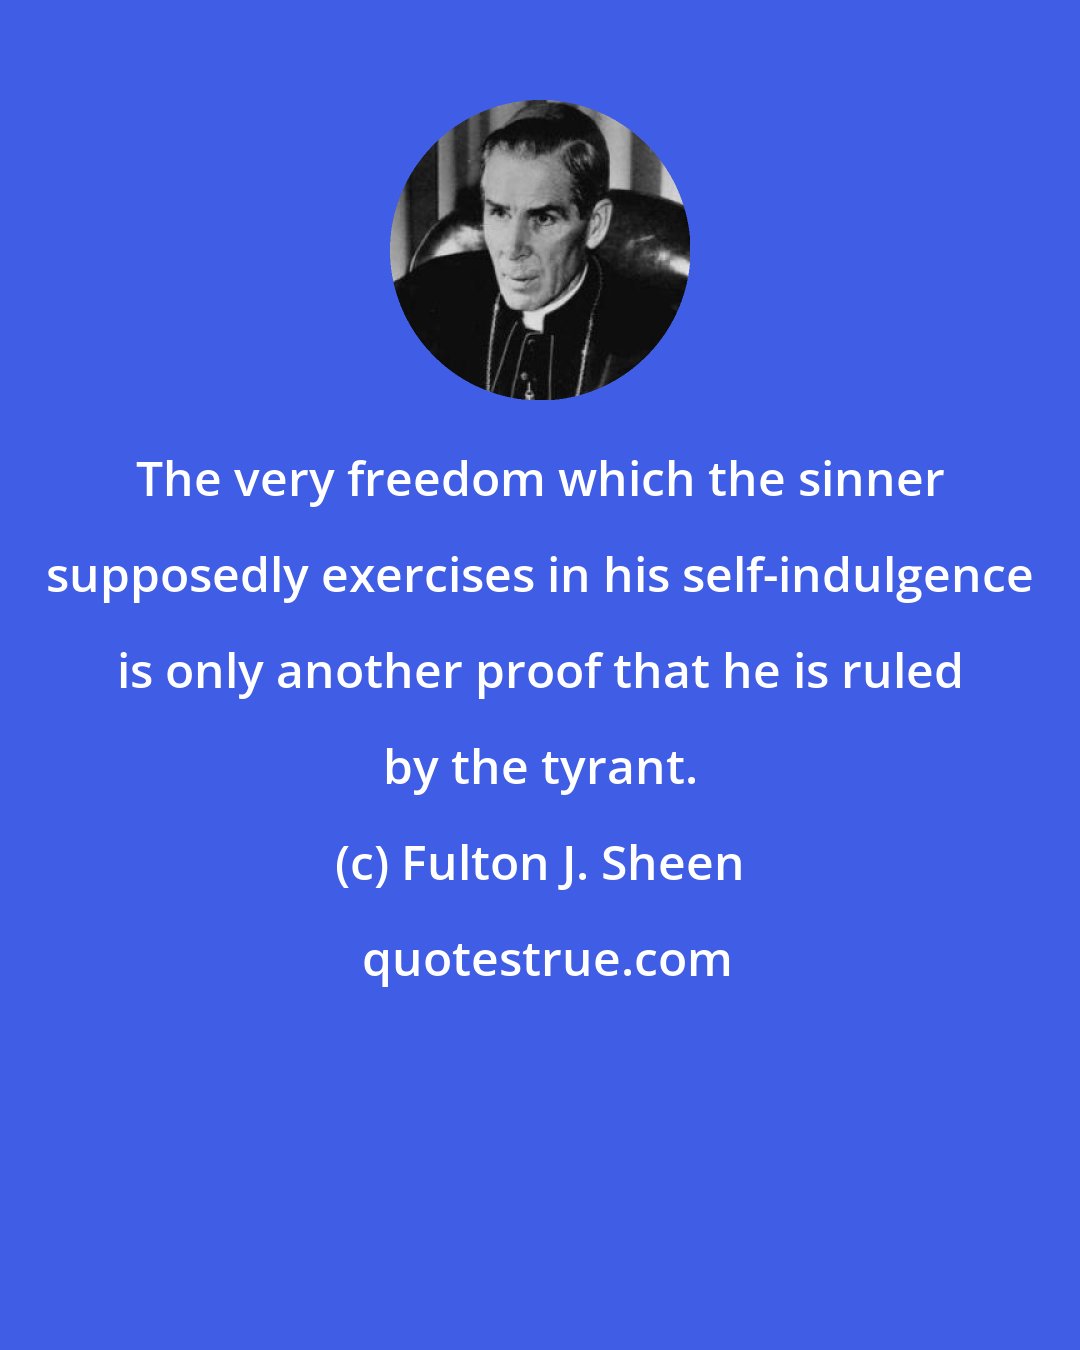 Fulton J. Sheen: The very freedom which the sinner supposedly exercises in his self-indulgence is only another proof that he is ruled by the tyrant.